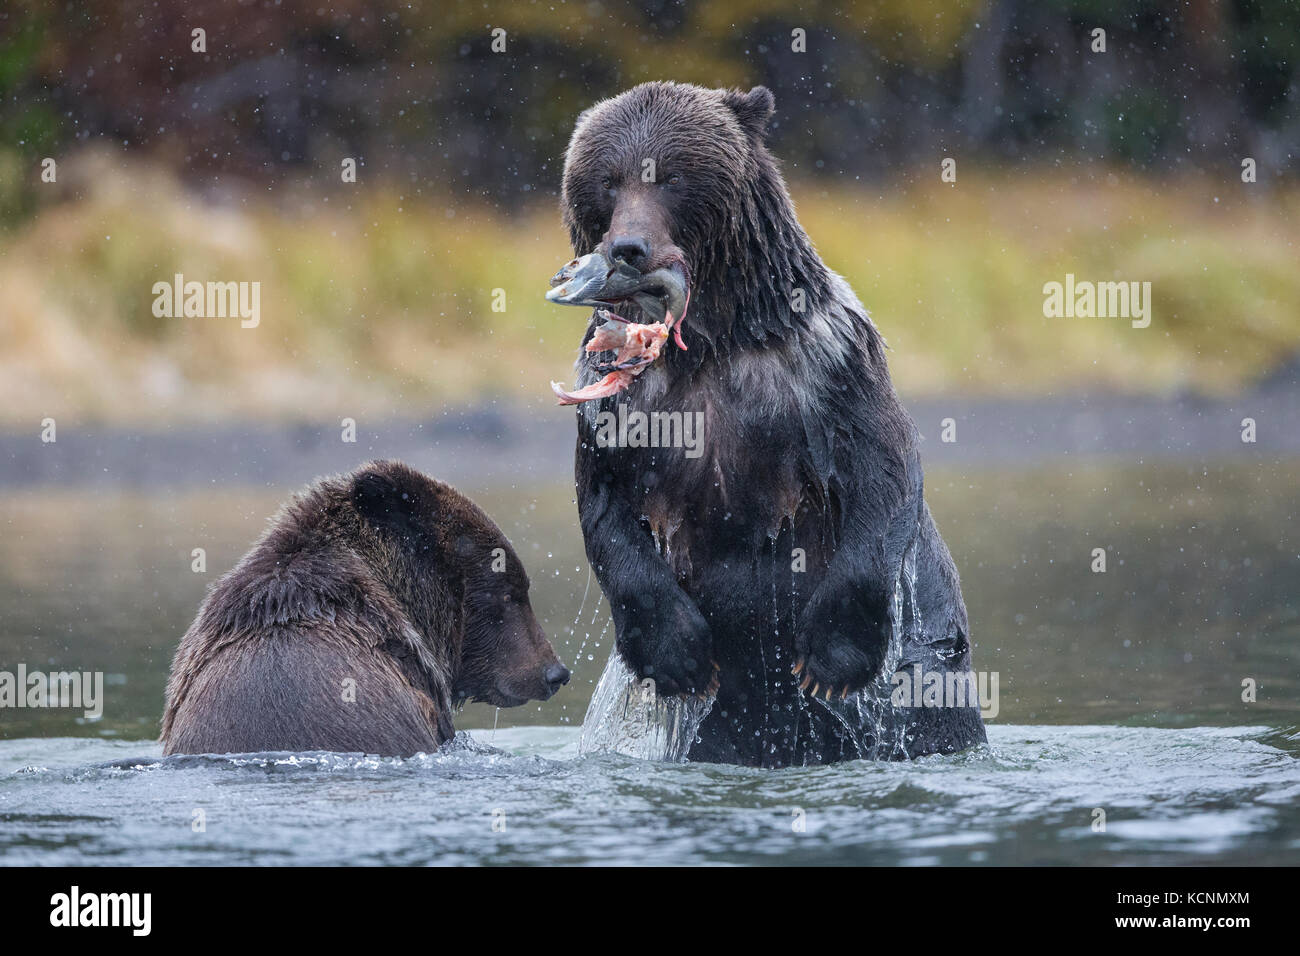 Grizzly bear (Ursus arctos horribilis), cubs (one standing)  interacting over sockeye salmon (Oncorhynchus nerka),  in early snowfall, Chilcotin Region, British Columbia, Canada. Stock Photo